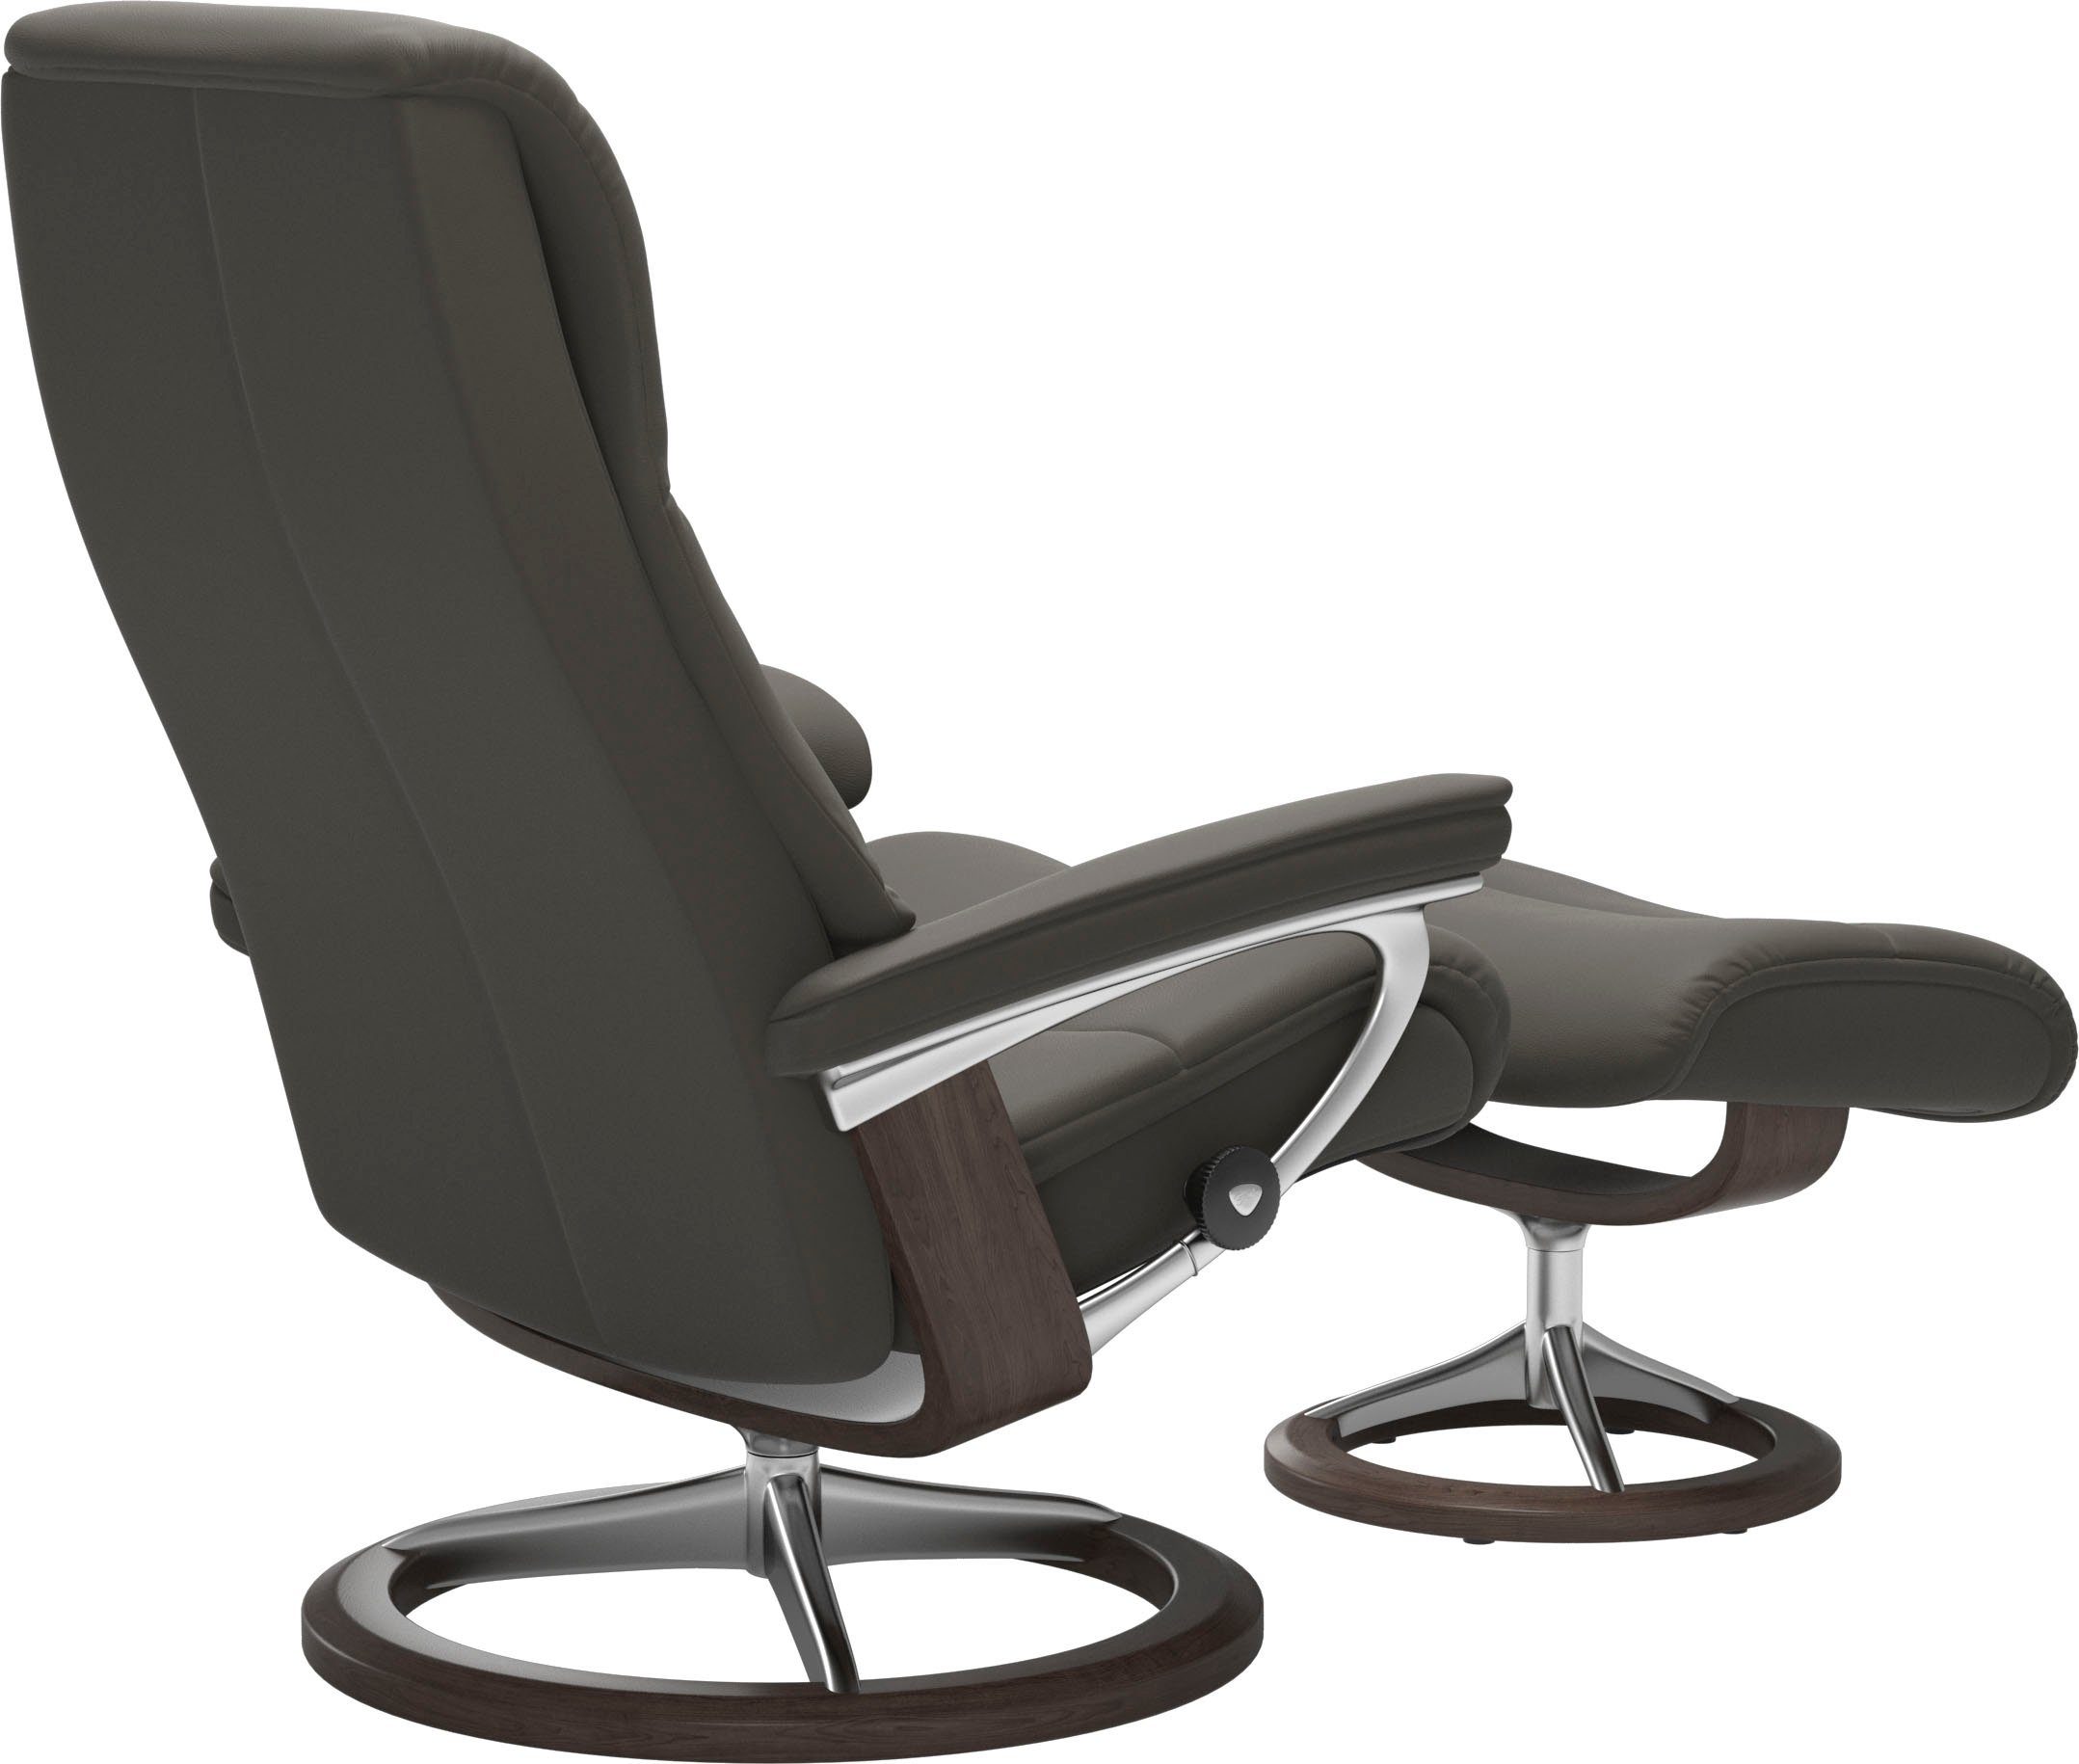 S,Gestell Stressless® Relaxsessel Wenge Größe View, Base, Signature mit